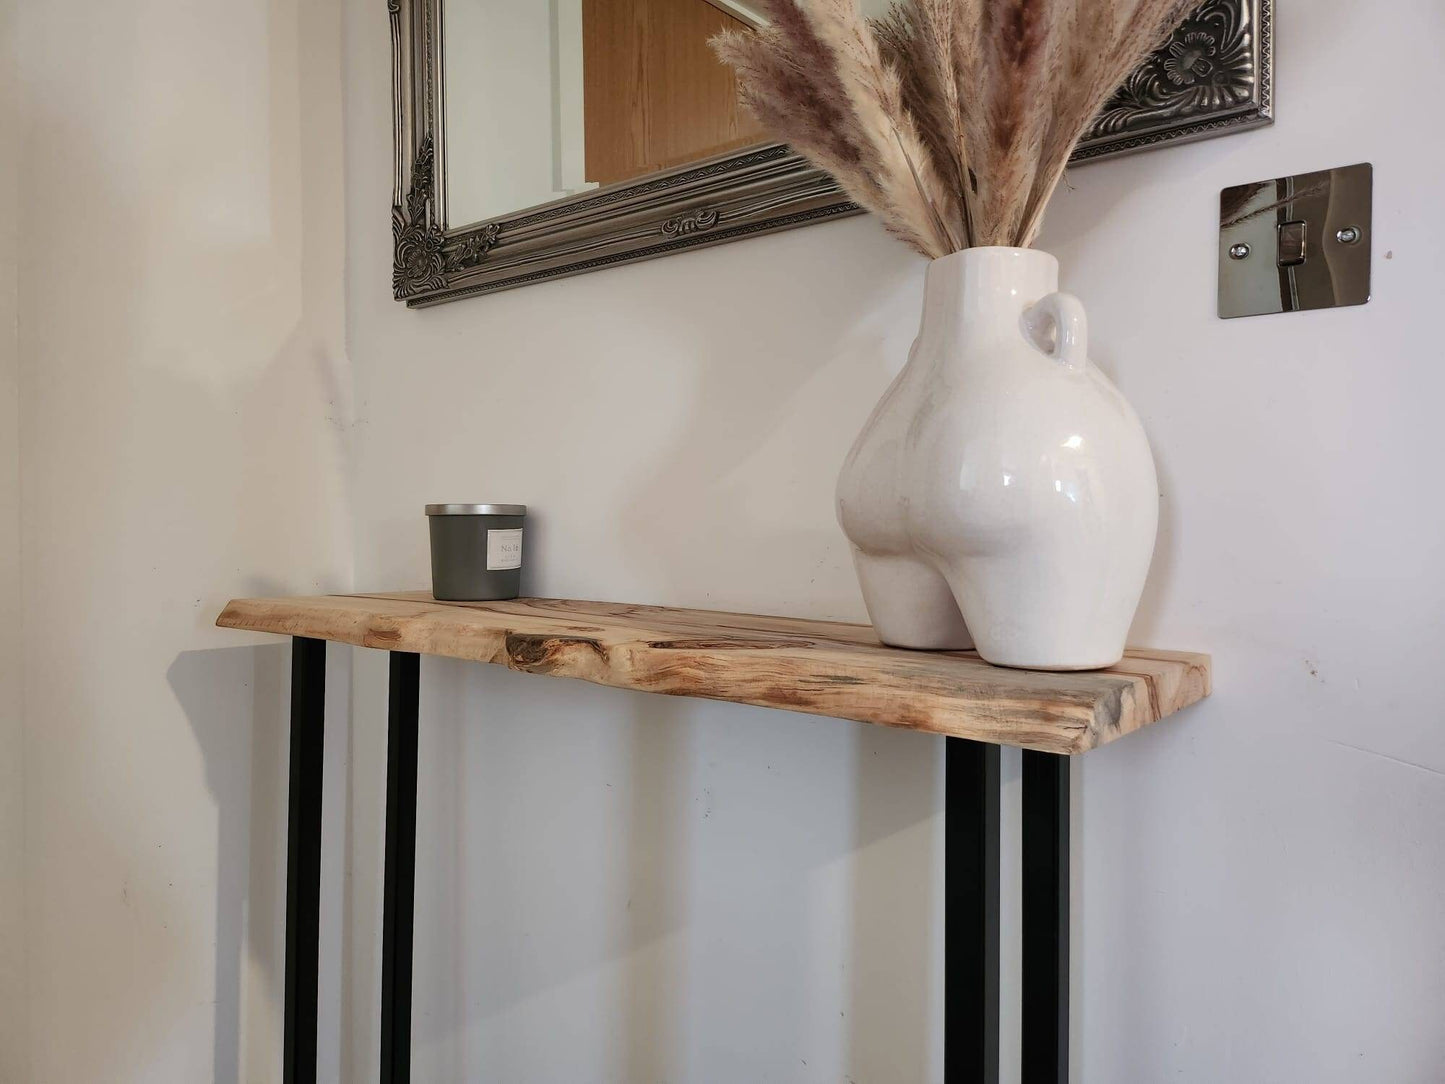 Stunning Live Edge Solid Spalted Horse Chestnut Entryway Table with Square Legs made from beautiful English Hardwood